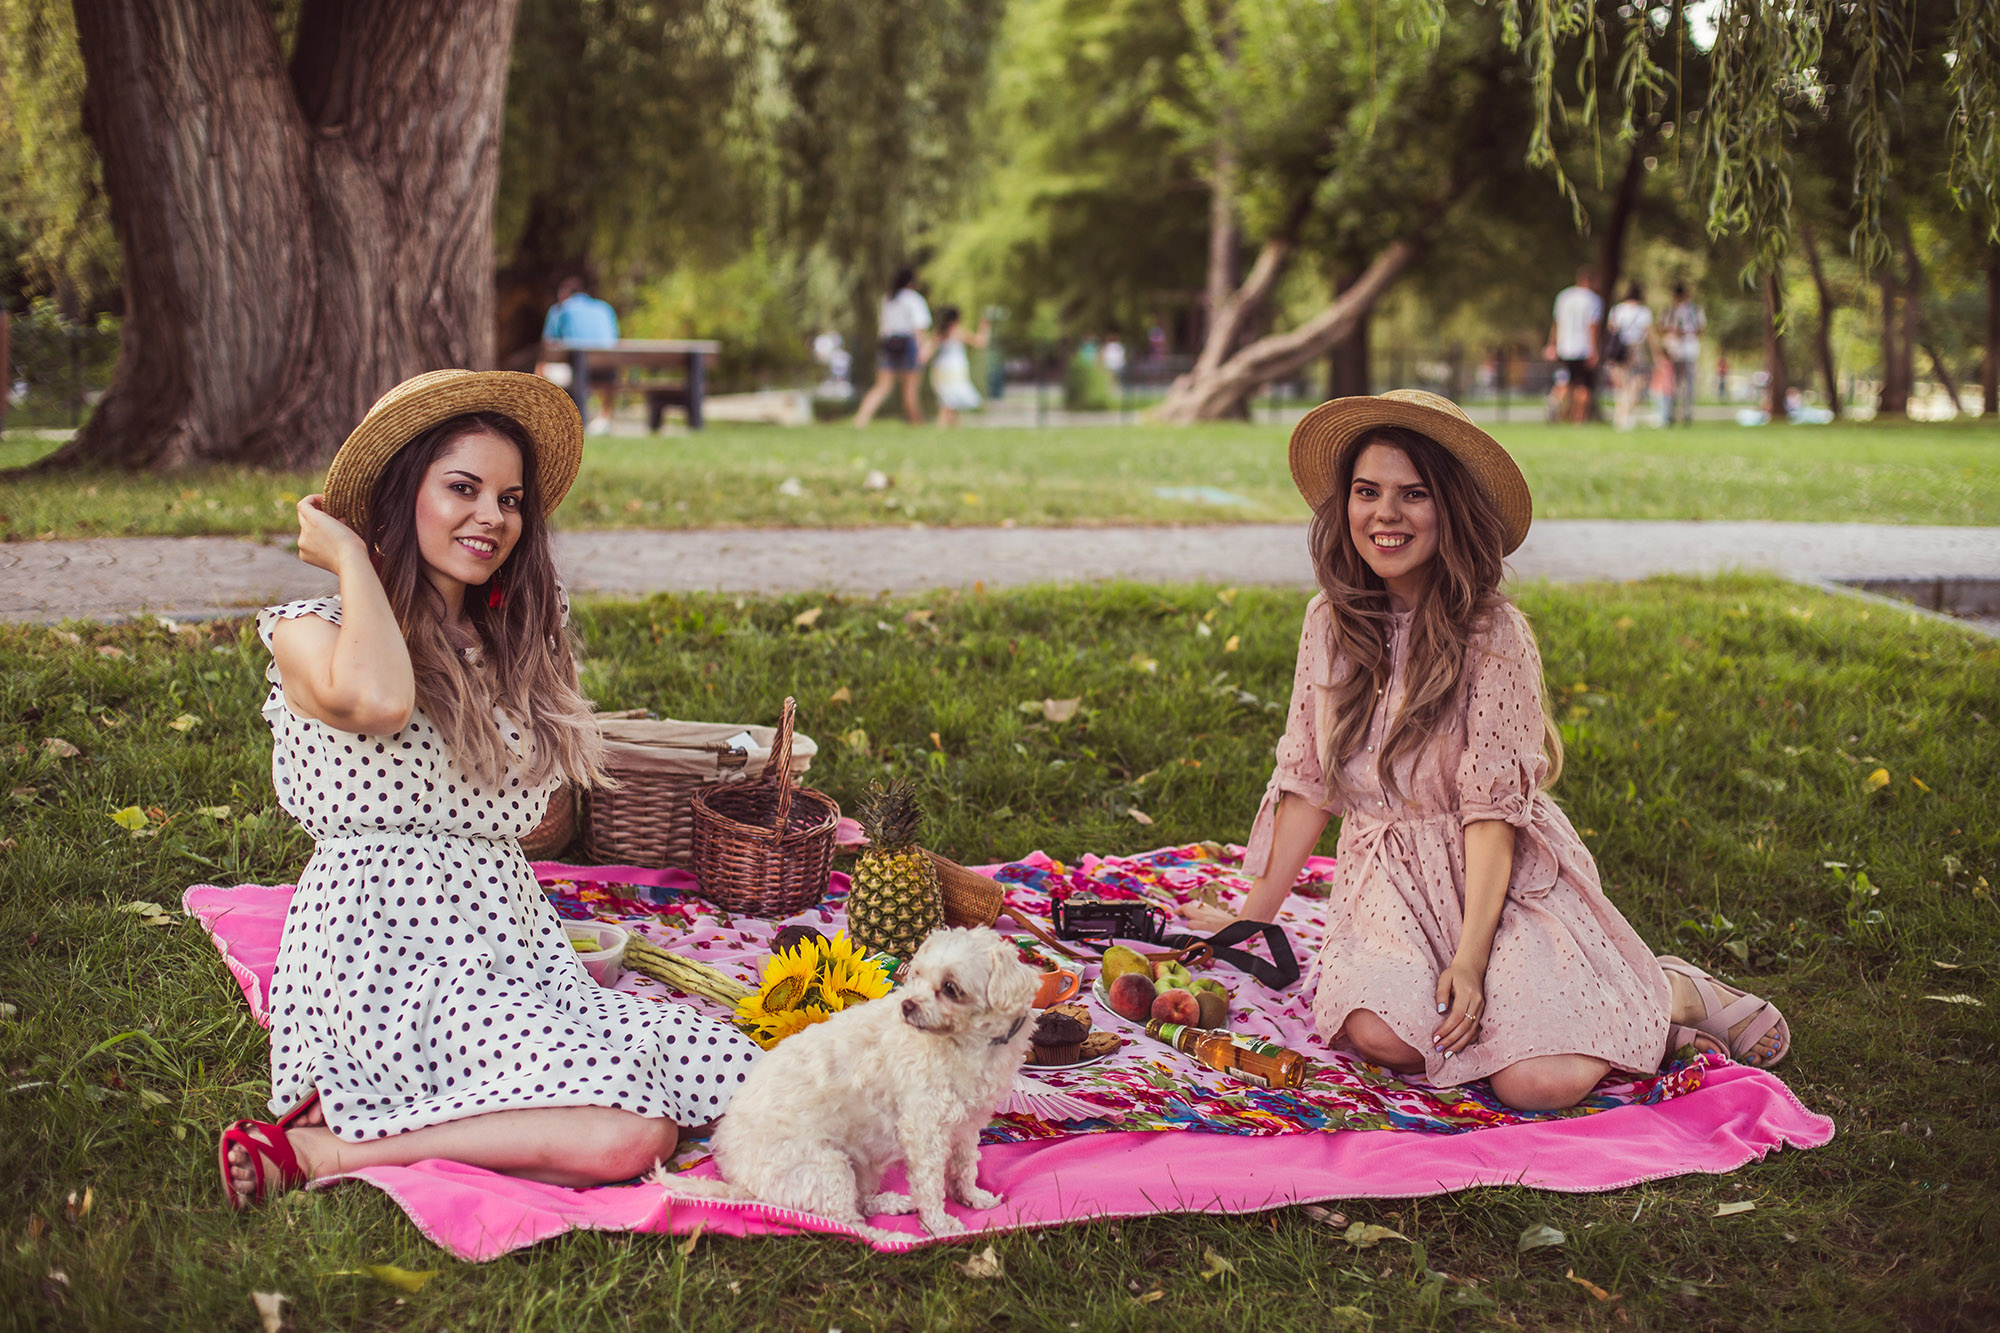 Nothing’s better than a picnic with friends